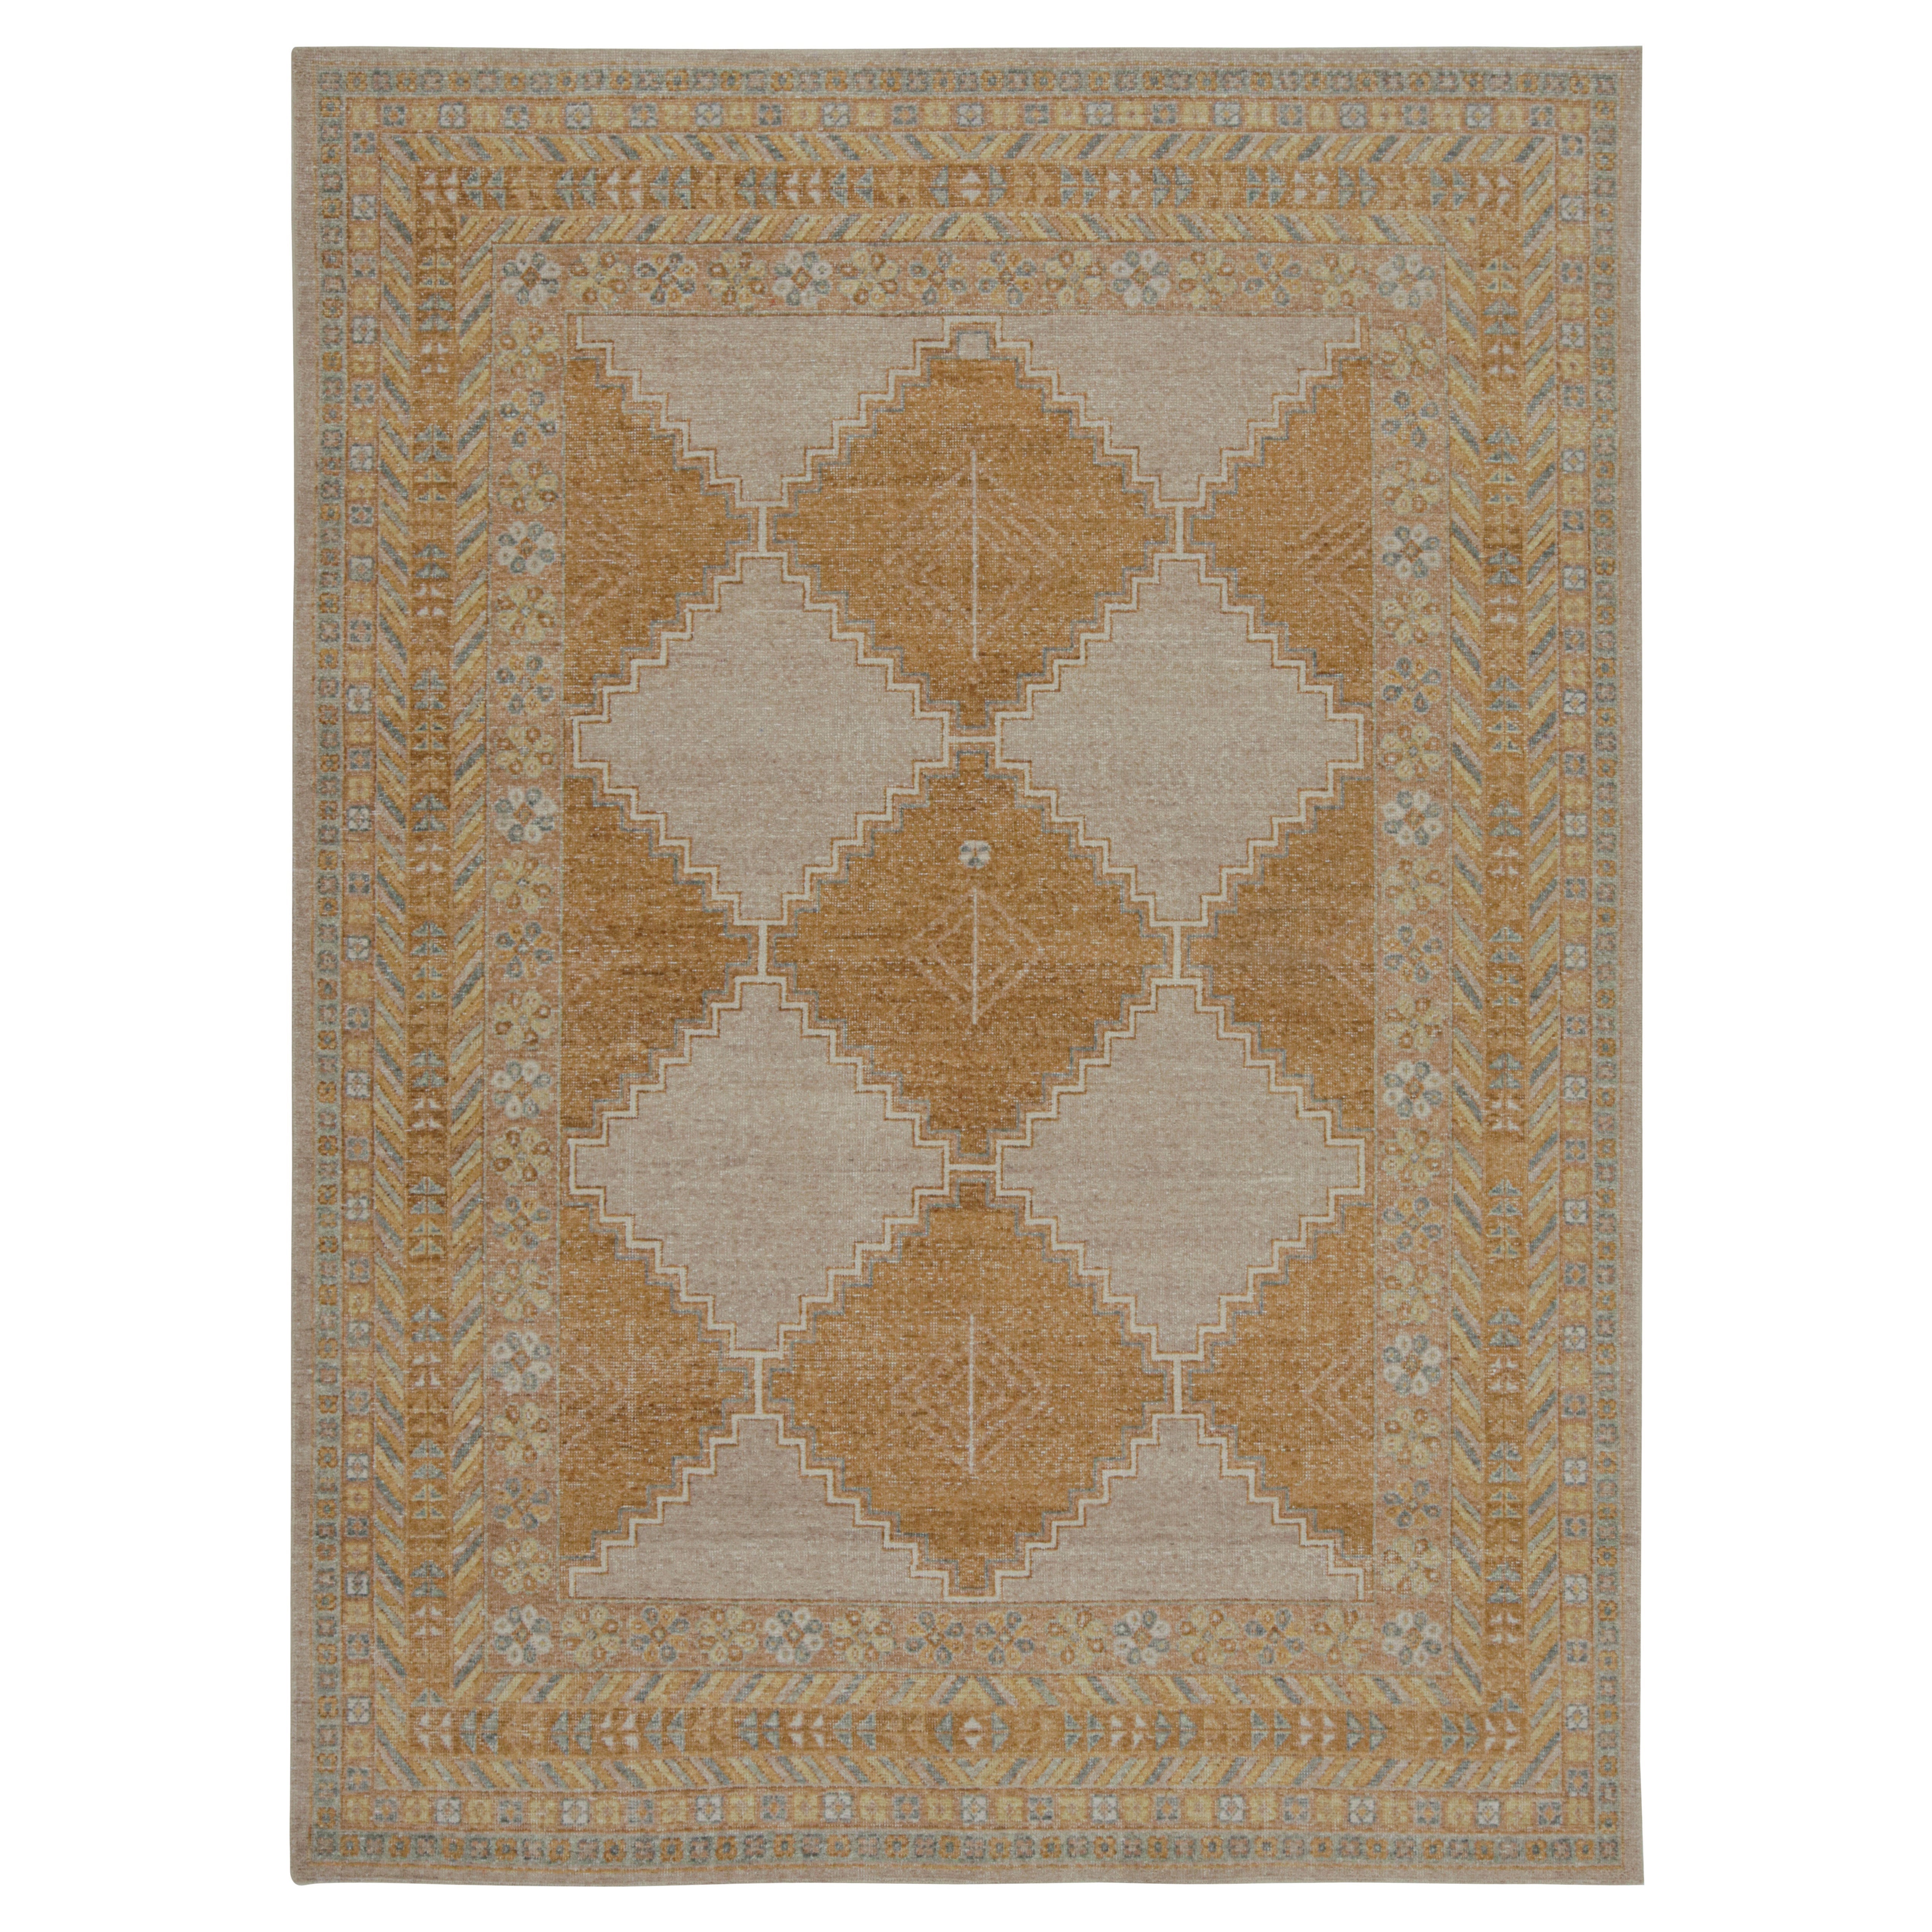 Rug & Kilim’s Distressed Tribal Rug In Beige, Brown and Gold Patterns For Sale